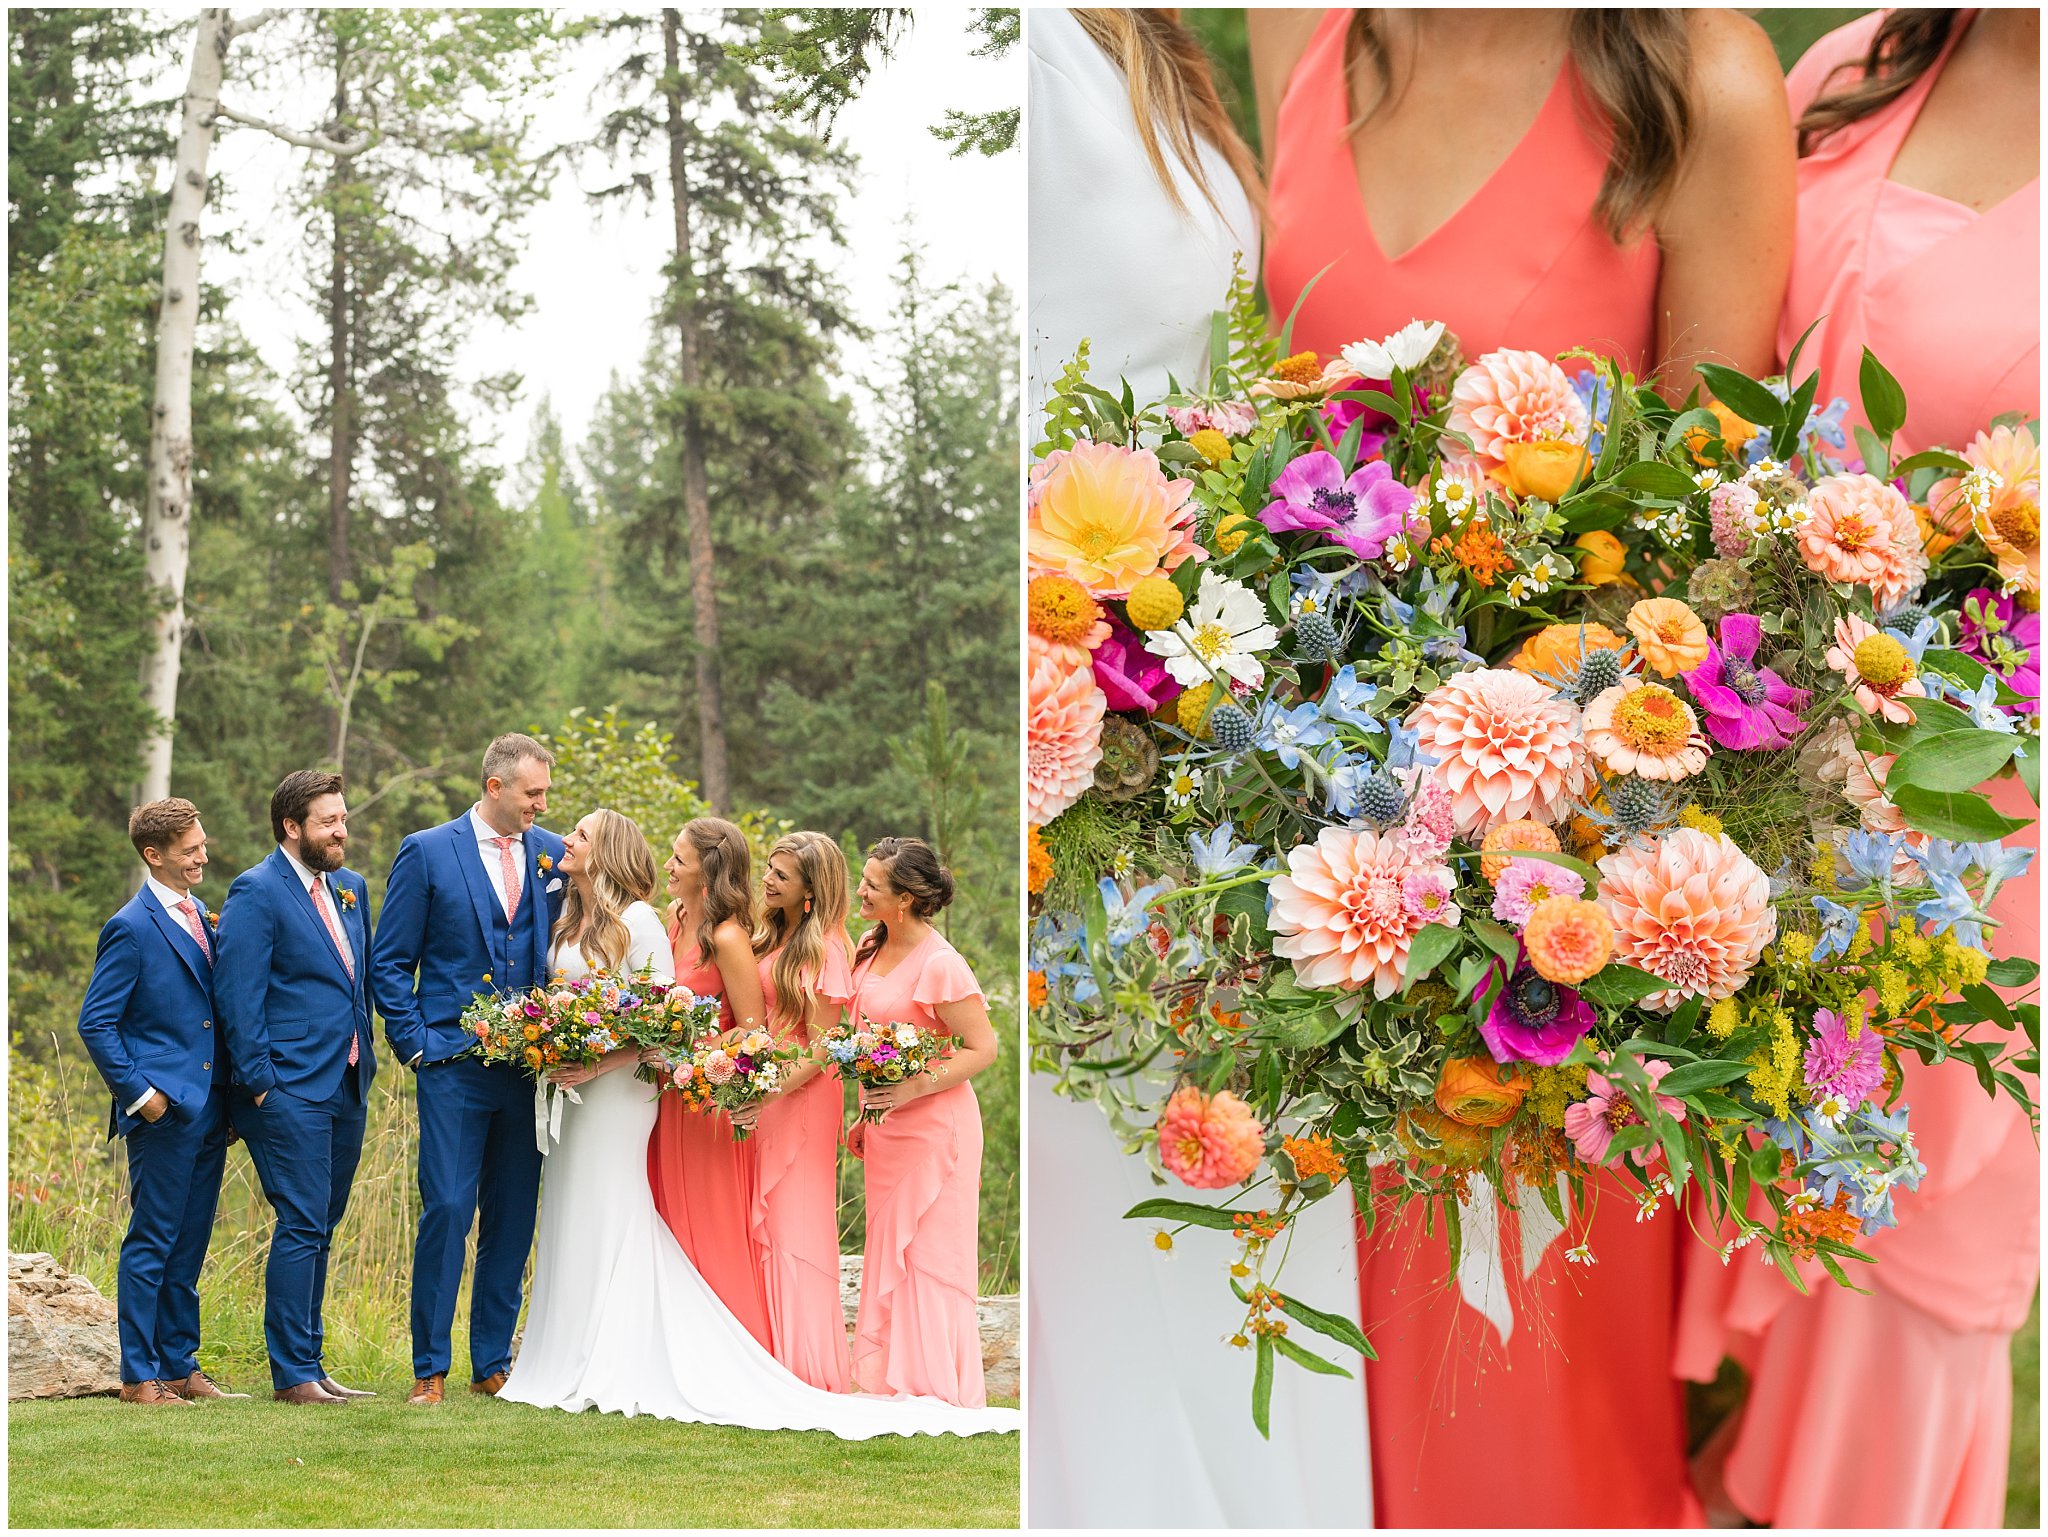 Wedding party portraits with bridesmaids in coral dresses with wildflowers, and groomsmen in blue suits with coral ties | Mountainside Weddings Kalispell Montana Destination Wedding | Jessie and Dallin Photography